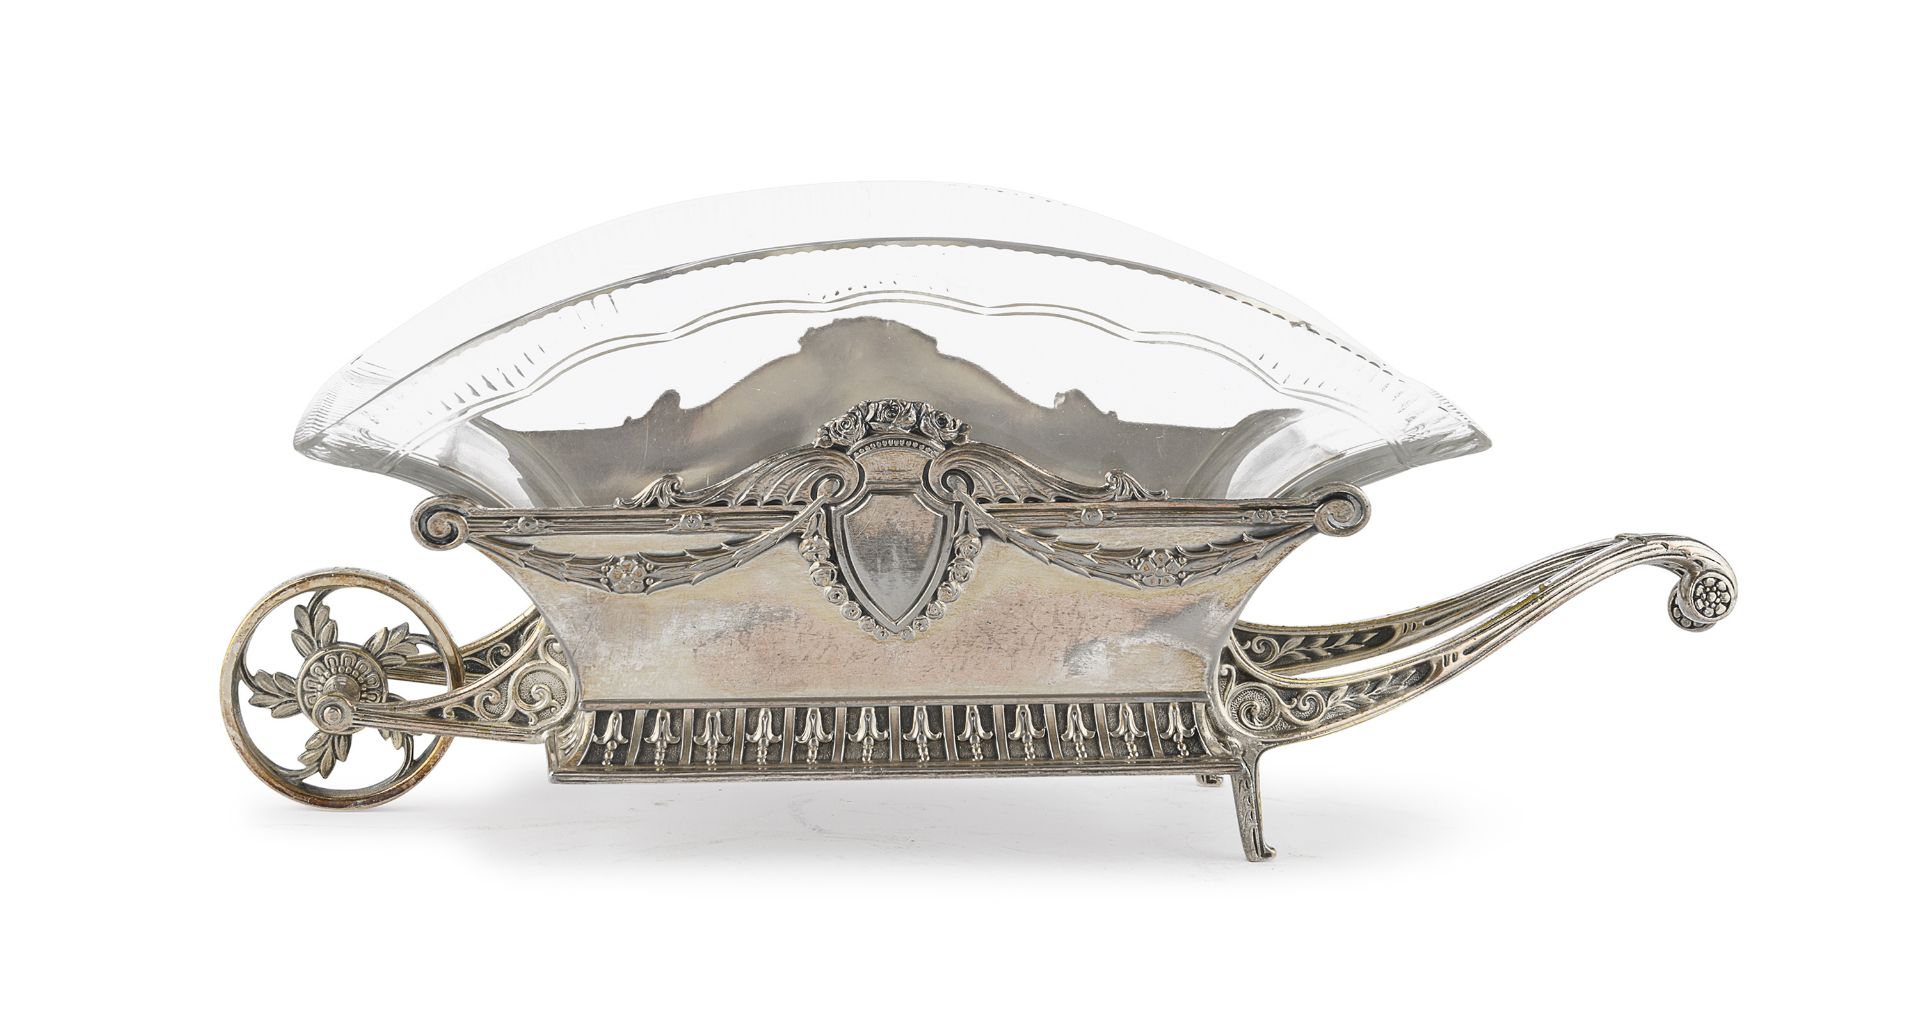 SILVER-PLATED CENTERPIECE 20TH CENTURY